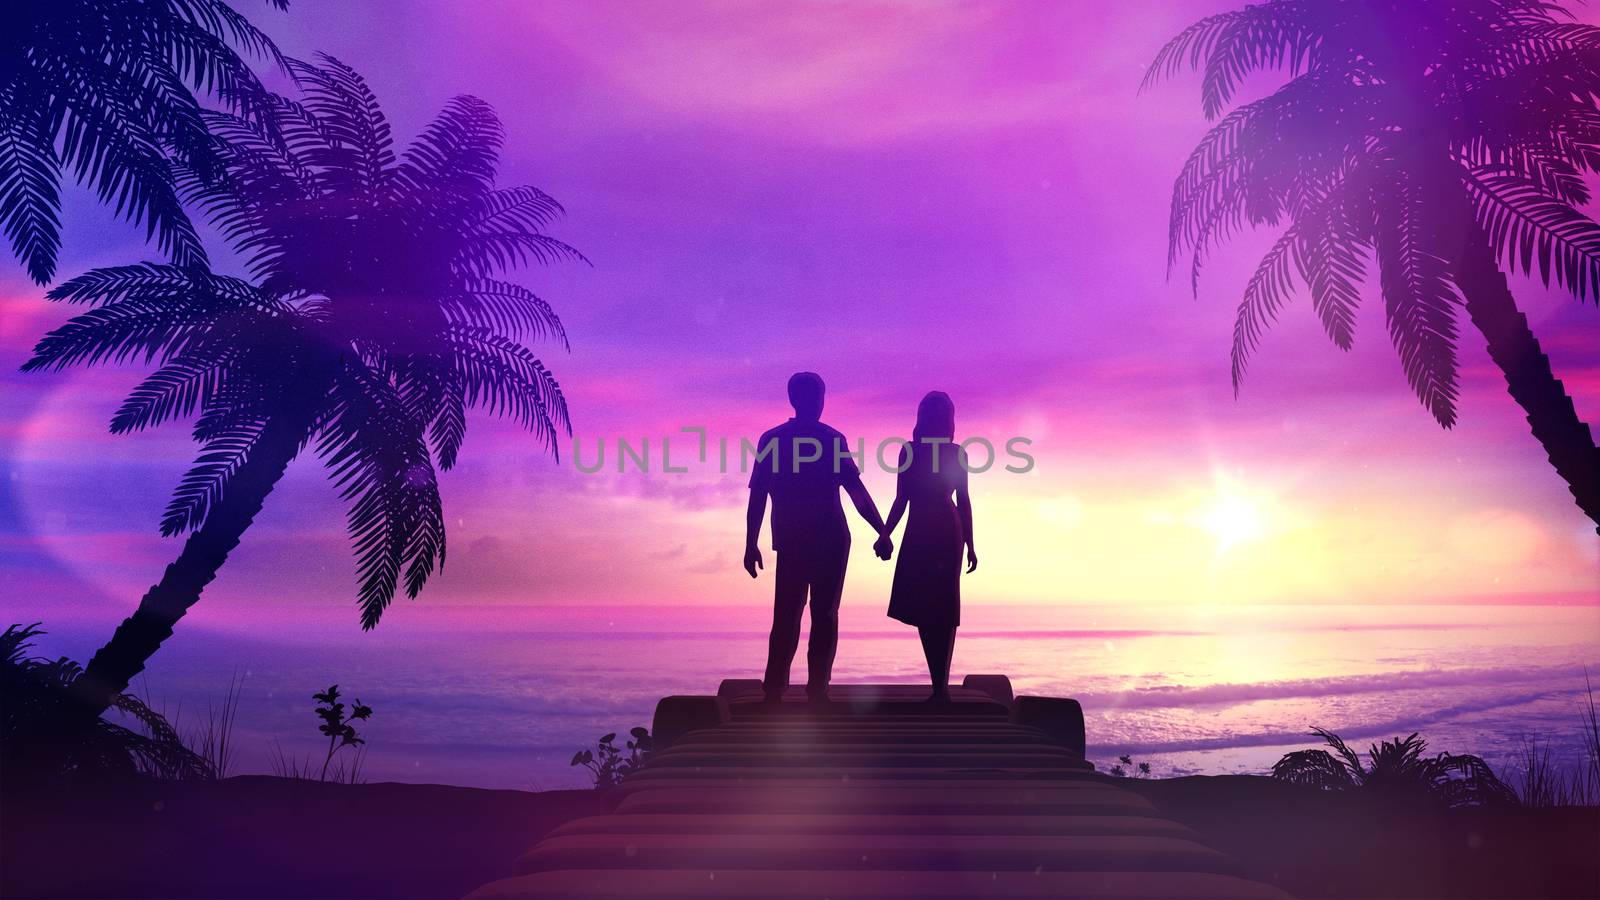 Very beautiful, colorful and bright background on the theme of travel, rest and holidays. Silhouettes of a couple in love standing against the backdrop of the setting sun create a gentle and magical atmosphere.